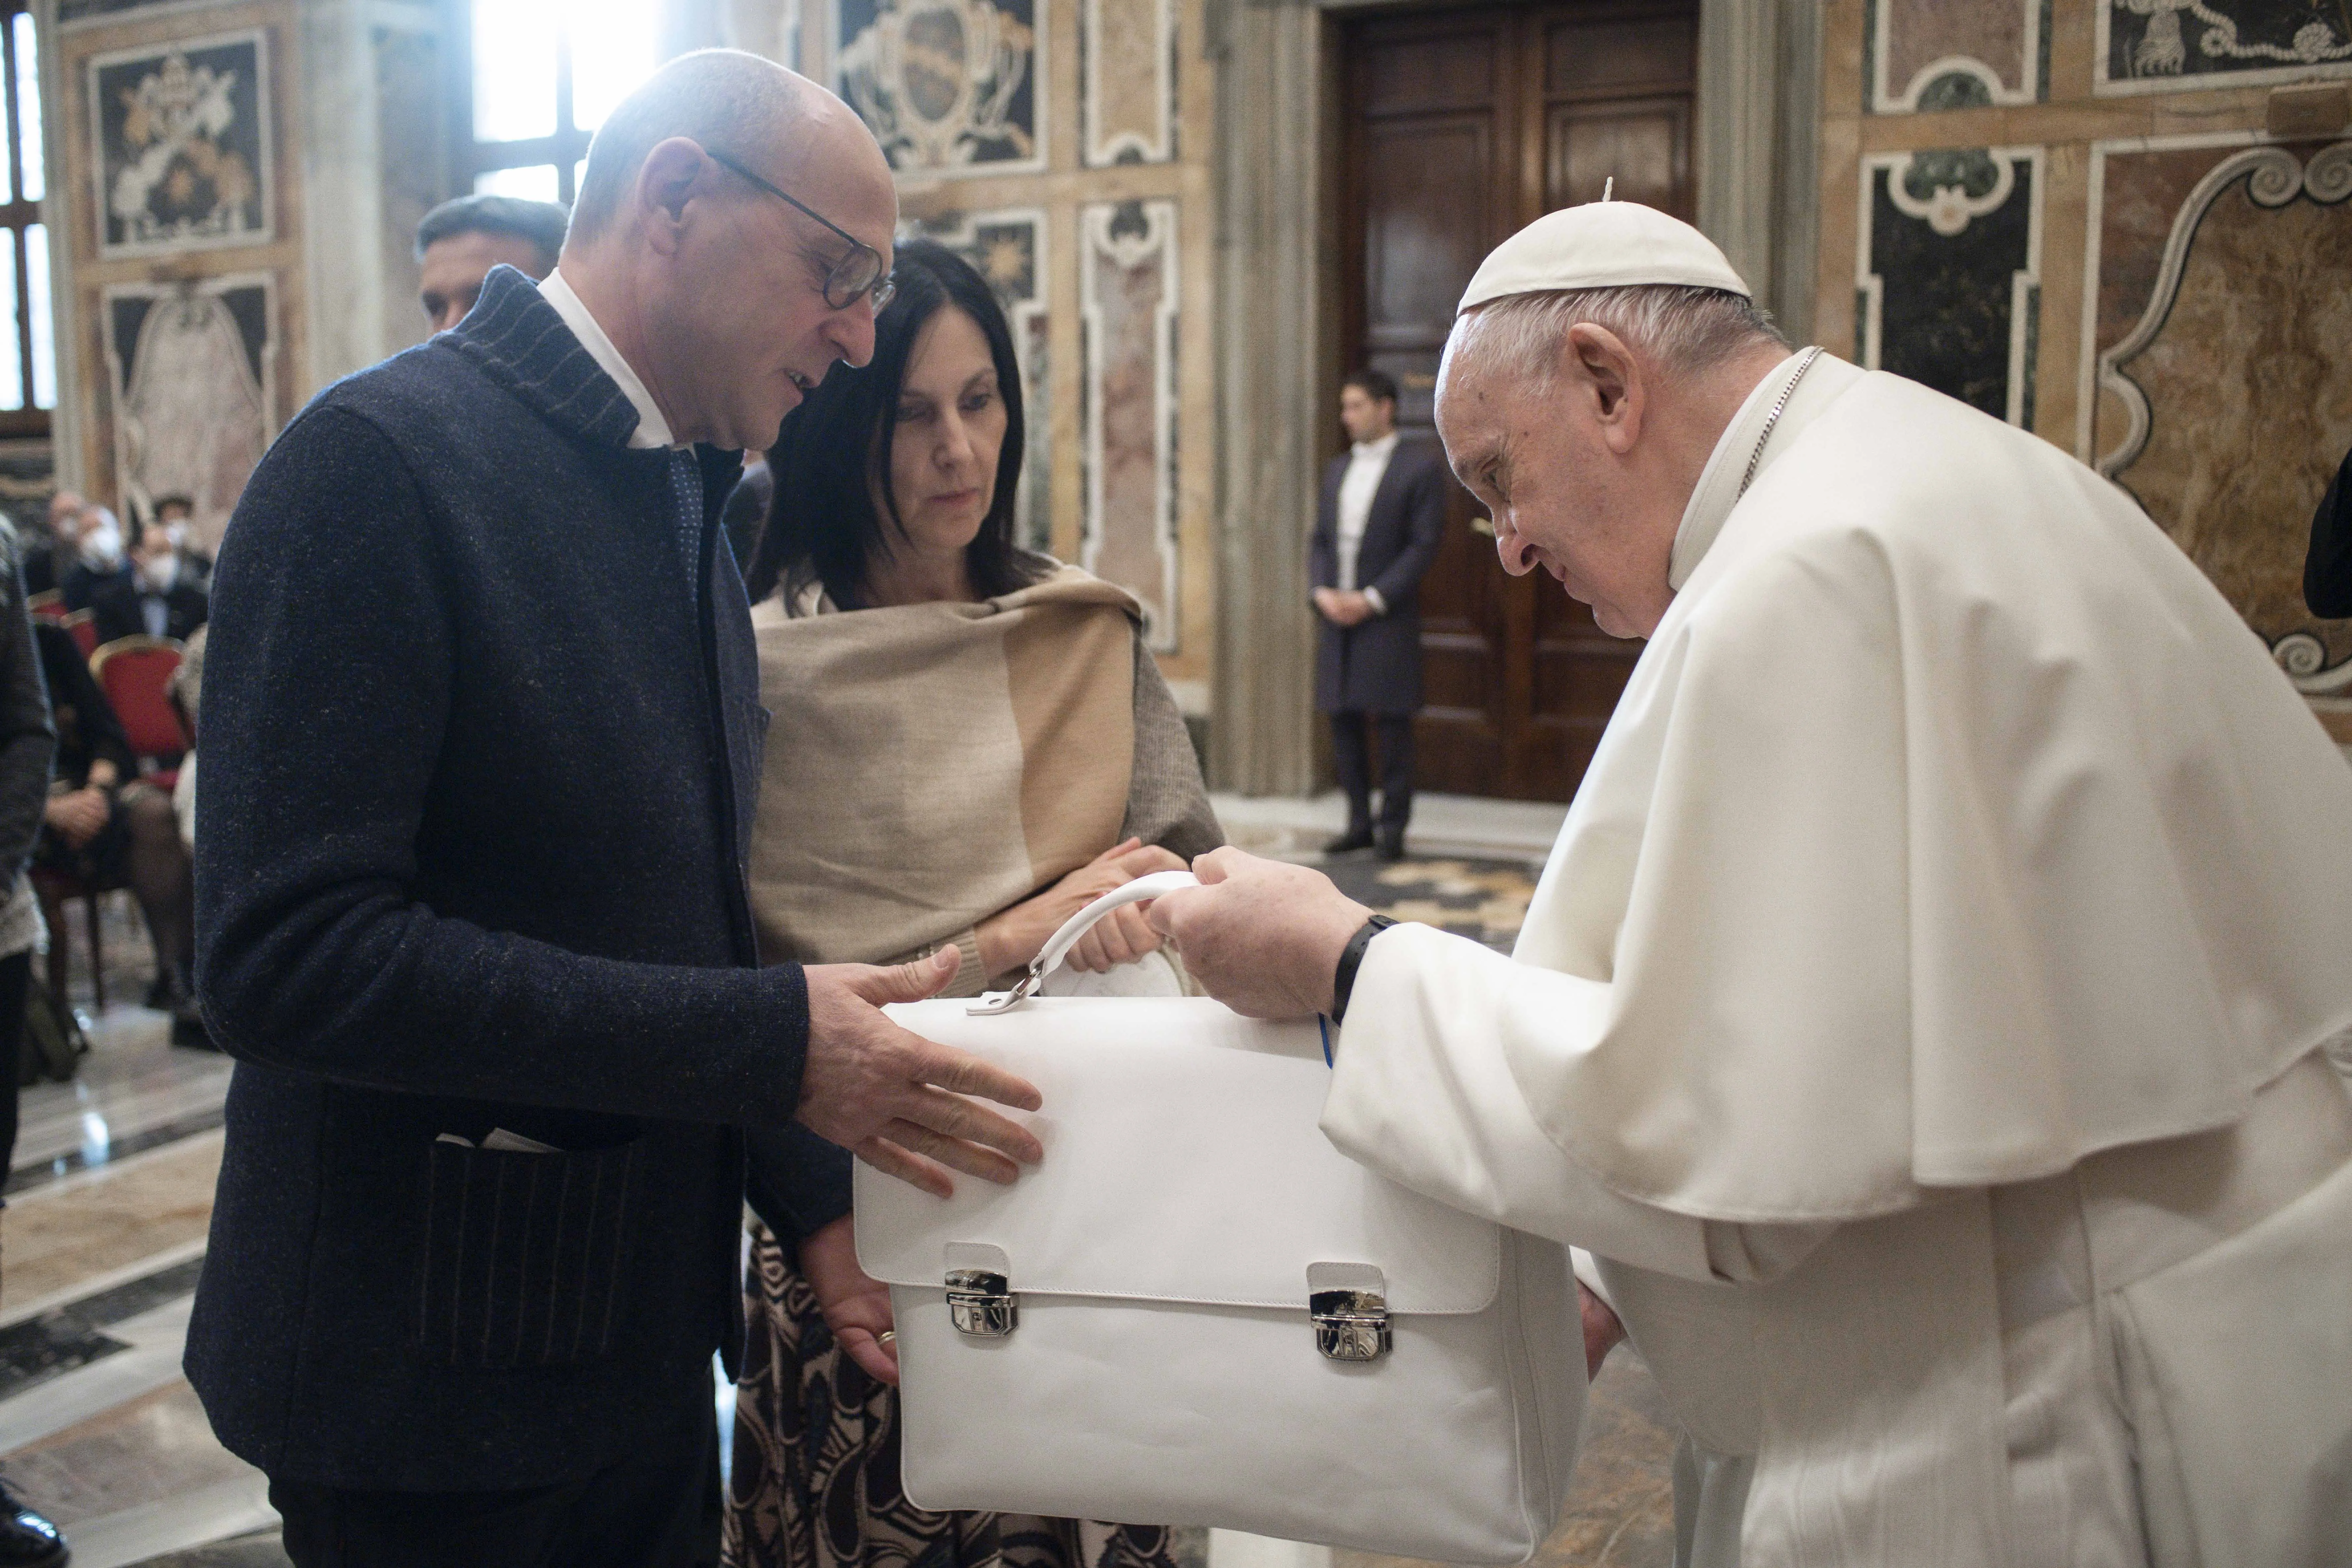 Pope Francis welcomes members of the Italian Association of Leather Chemists during an audience in the Clementine Hall of the Vatican Apostolic Palace on January 29, 2022.?w=200&h=150